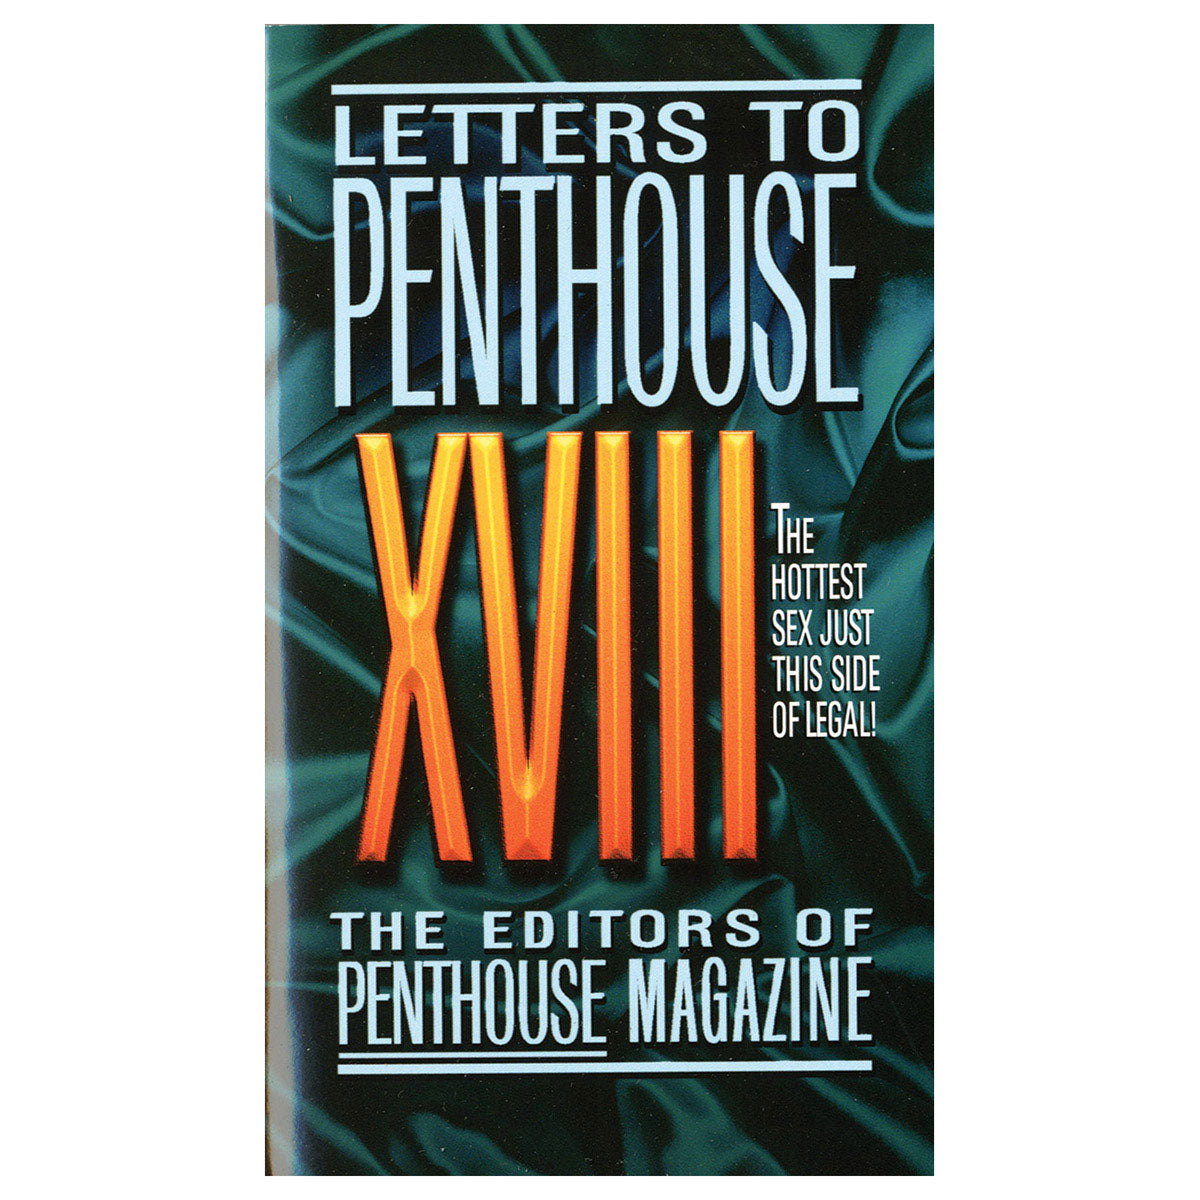 Letters to Penthouse XVIII - The Hottest Sex Just This Side of Legal! - Grand Central Publishing